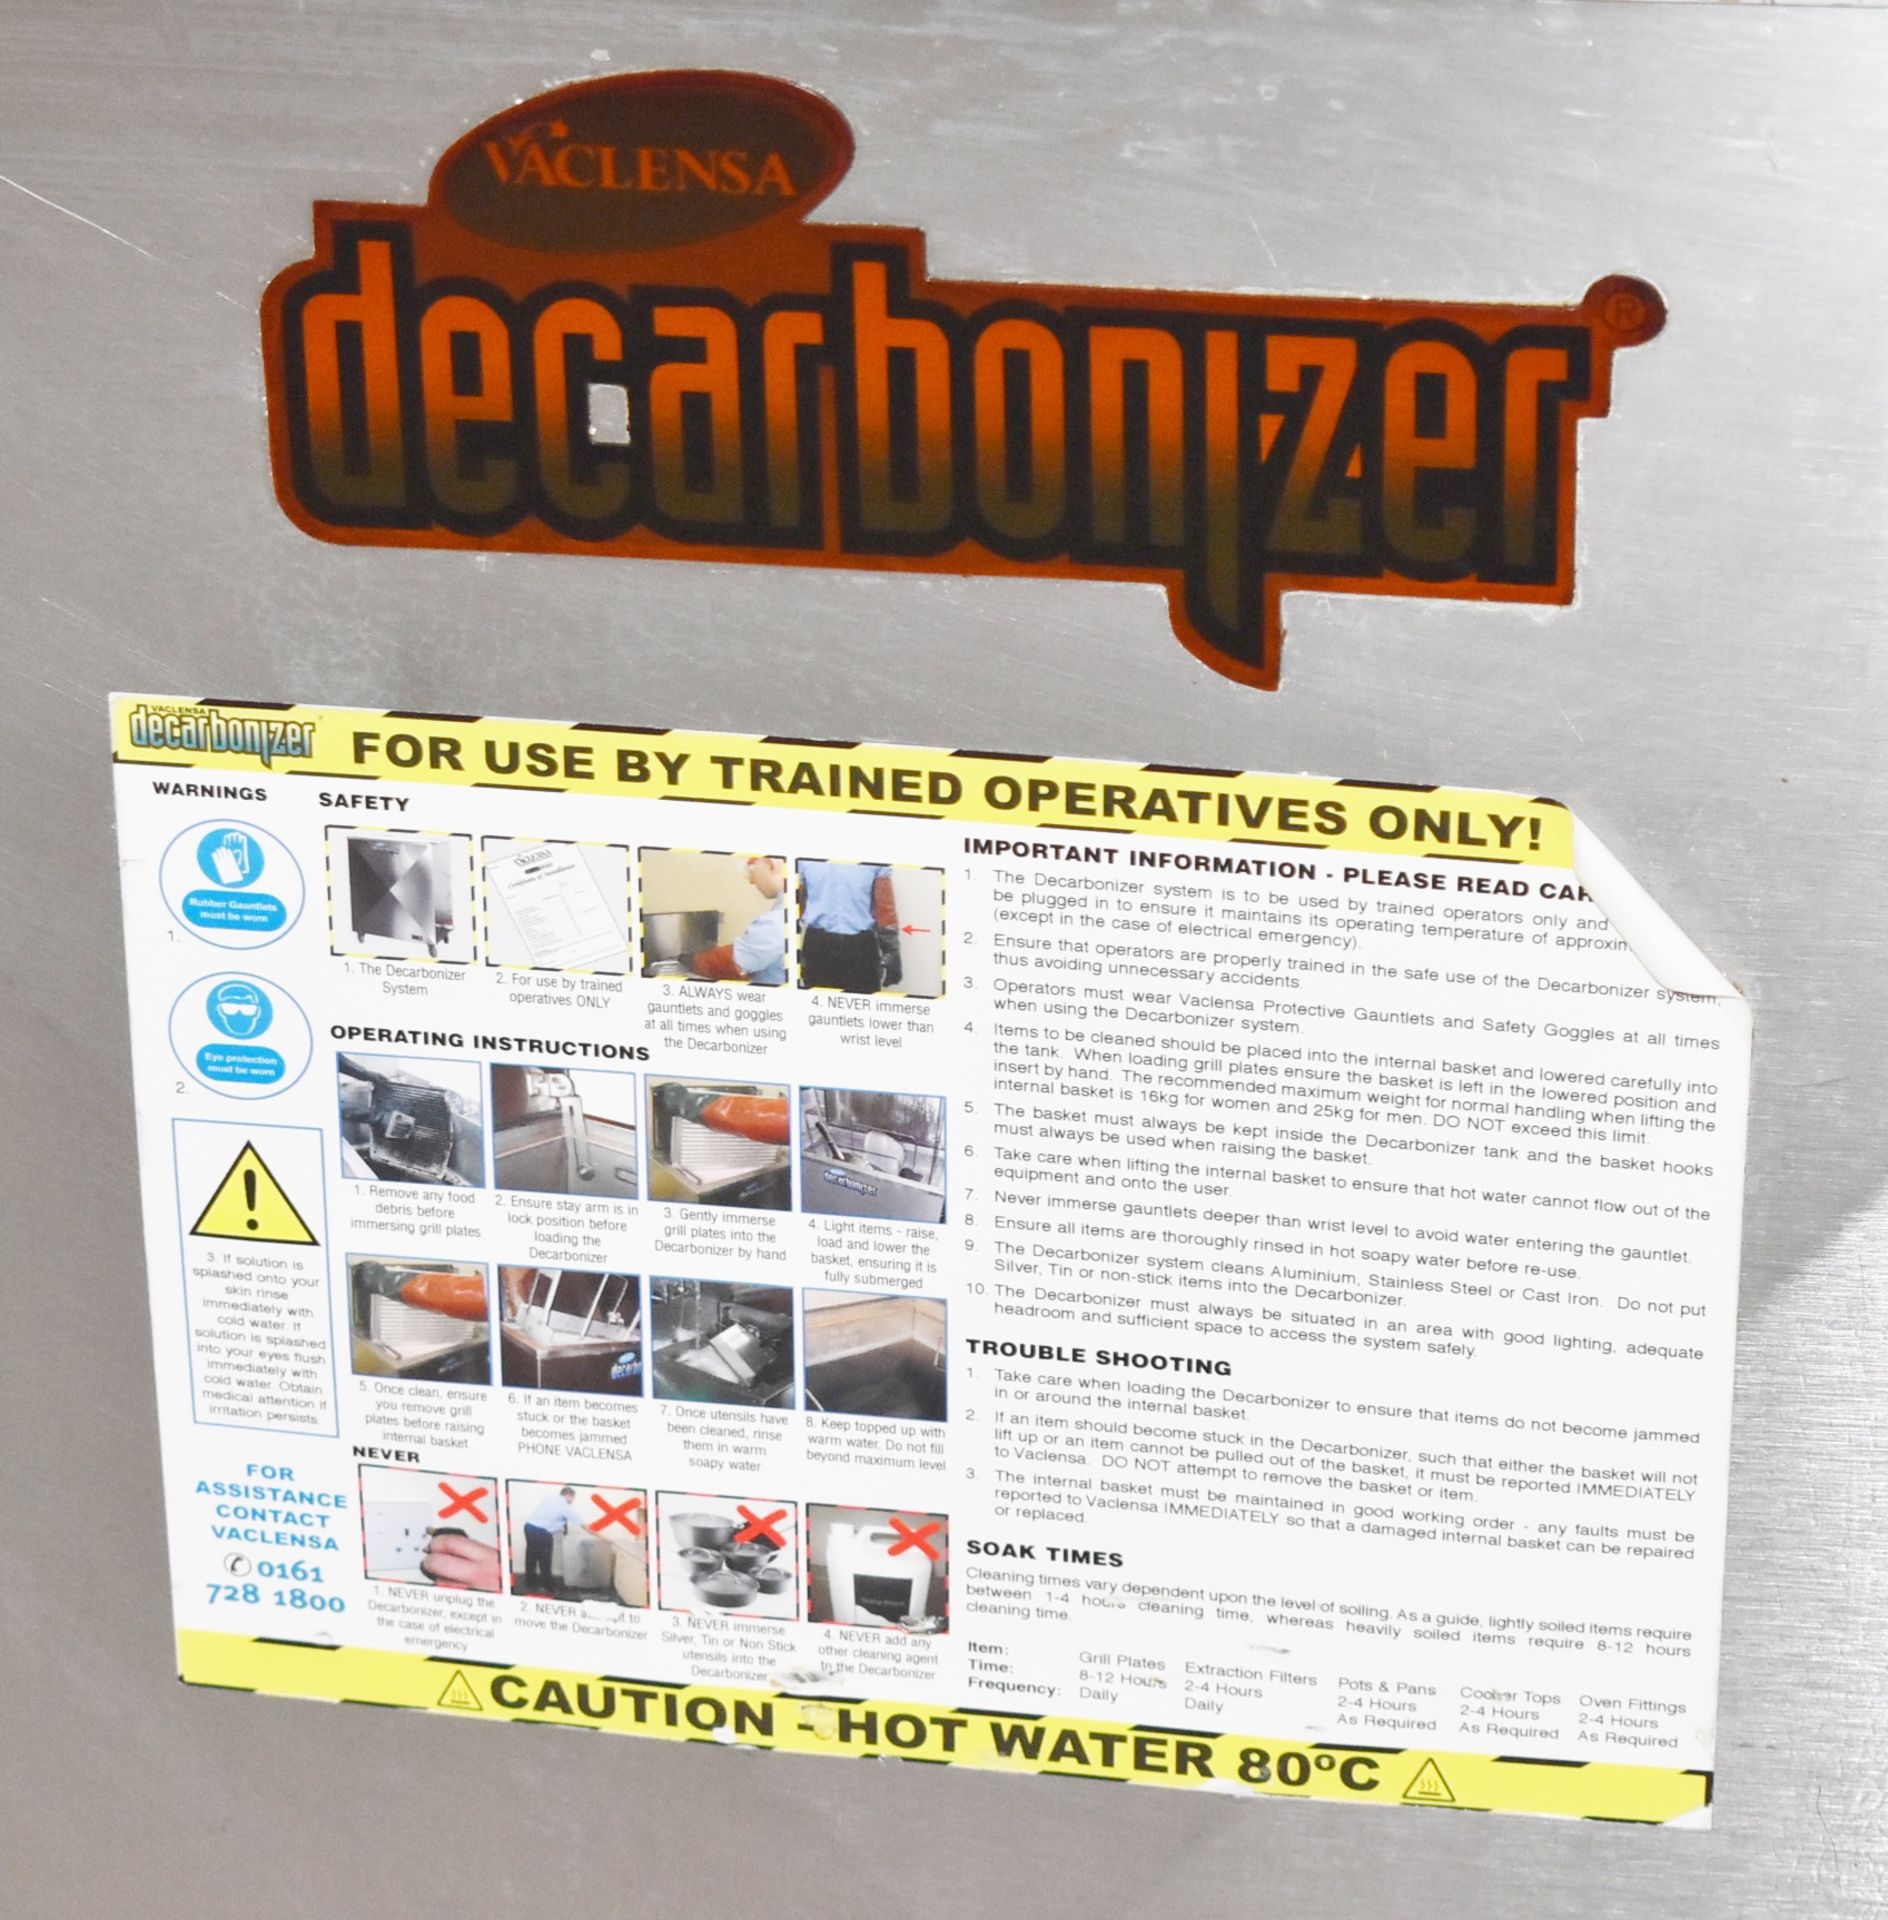 1 x Vaclensa Decarbonizer - Powerful Cleaning System Designed to Effectively Clean a Wide Range of - Image 5 of 10